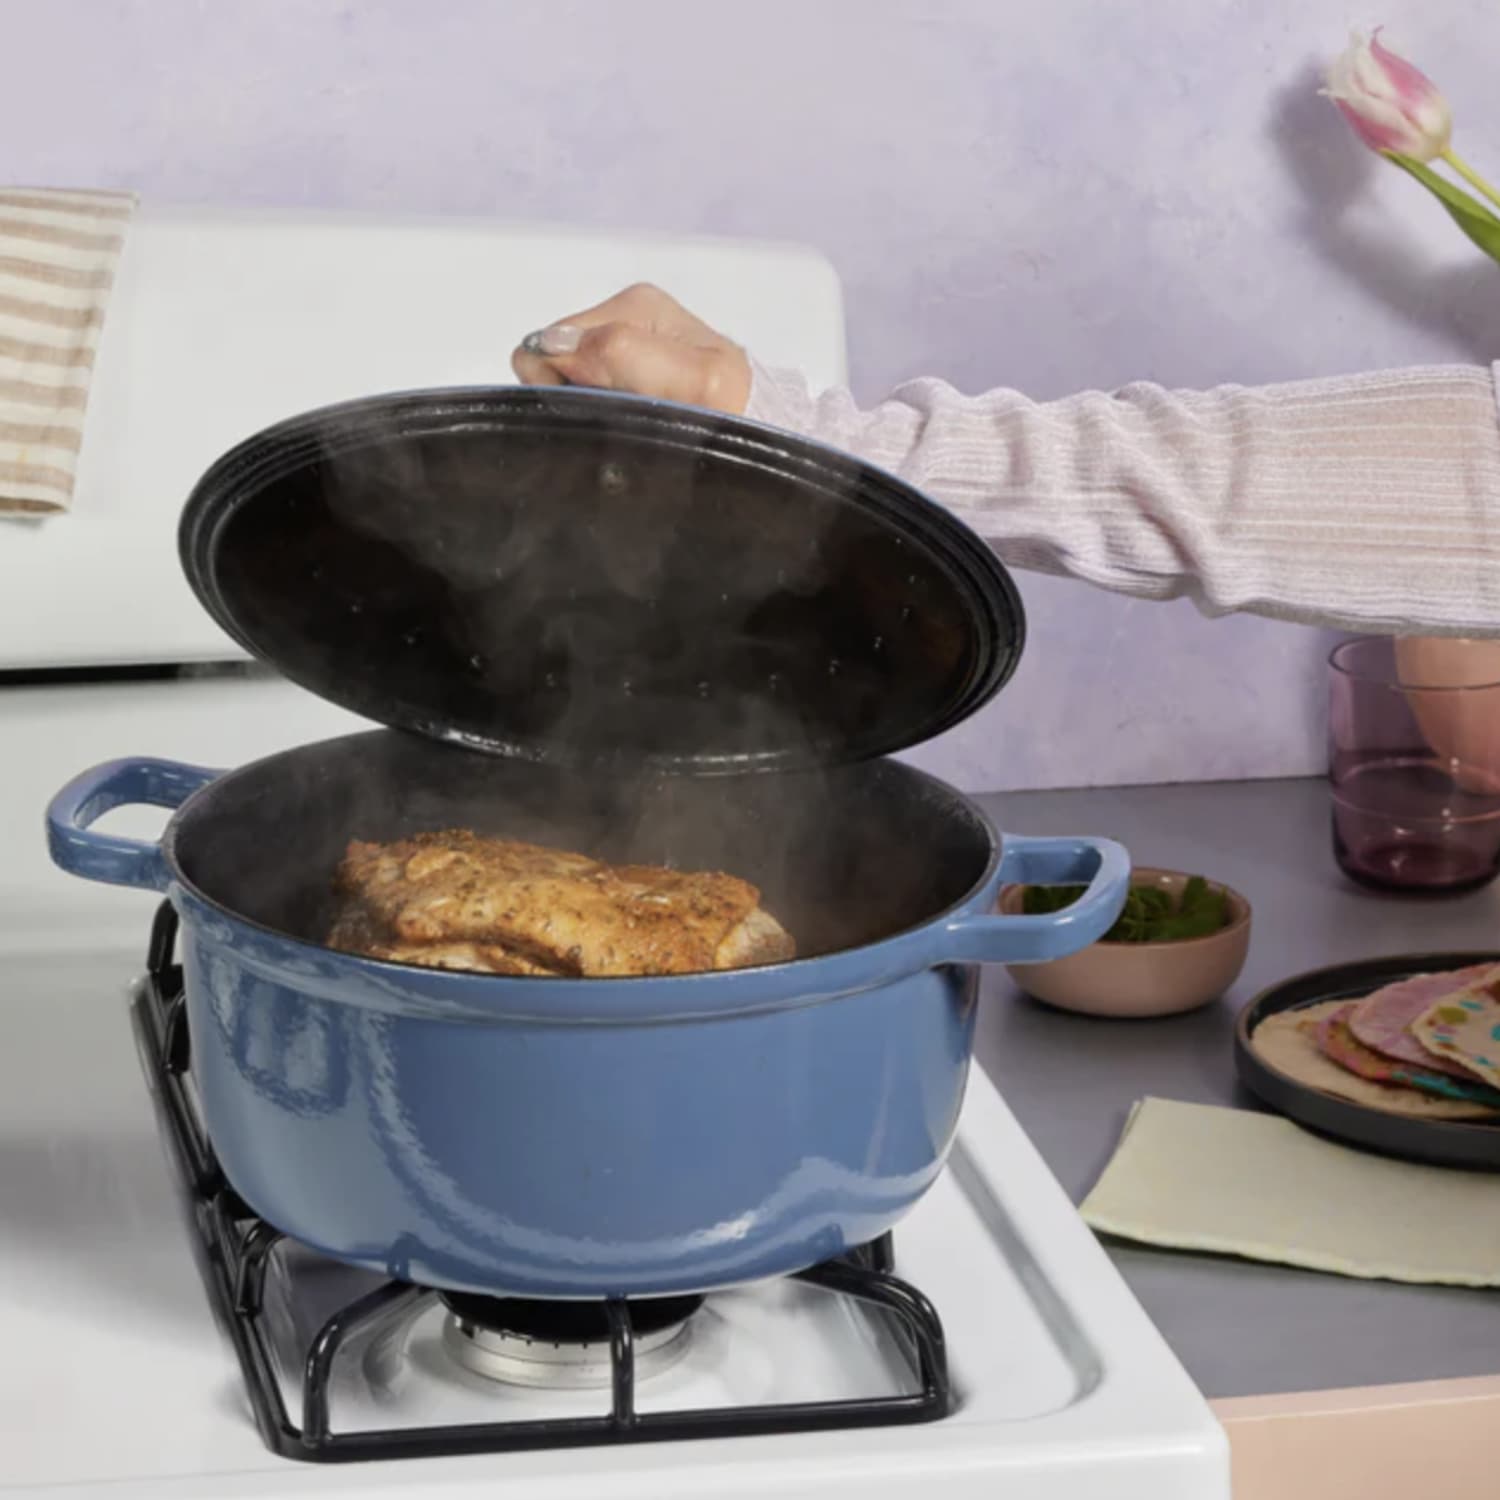 https://cdn.apartmenttherapy.info/image/upload/f_jpg,q_auto:eco,c_fill,g_auto,w_1500,ar_1:1/commerce%2Four-place-cast-iron-perfect-pot-2